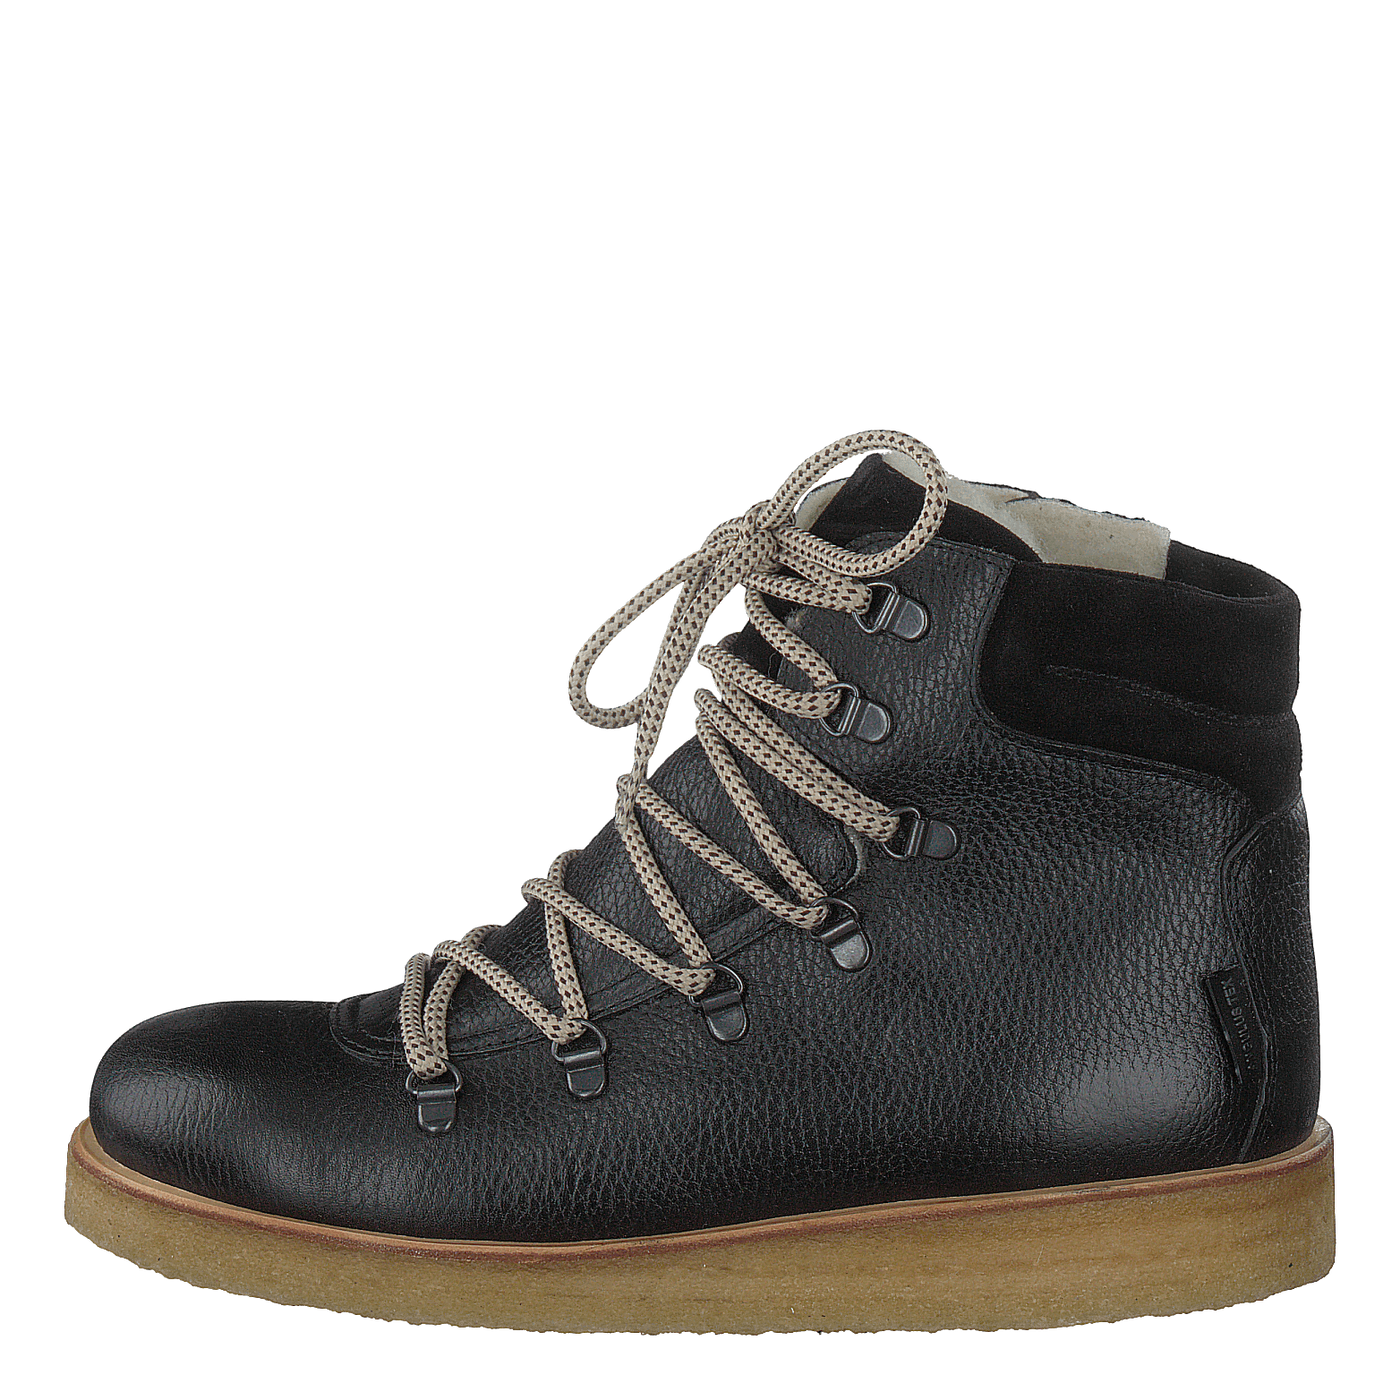 Tex-boot With Laces And Zipper Black